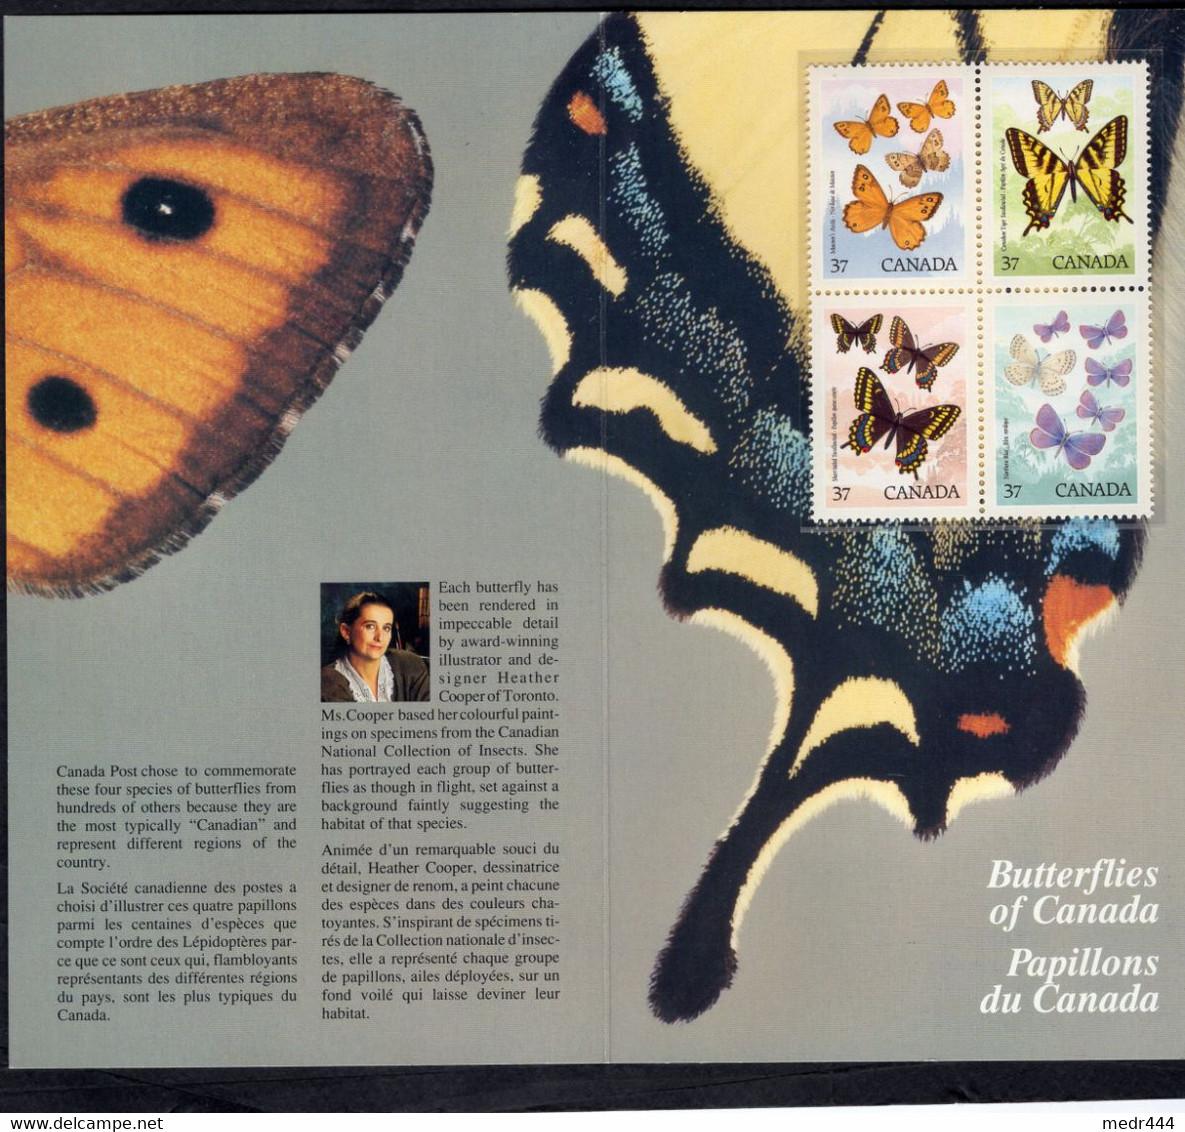 Canada 1988 - Butterflies Of Canana/Papillons Du Canada - Flyer + Stamps 4v - Complete Set - Excellent Quality - Cartoline Illustrate Ufficiali (della Posta)